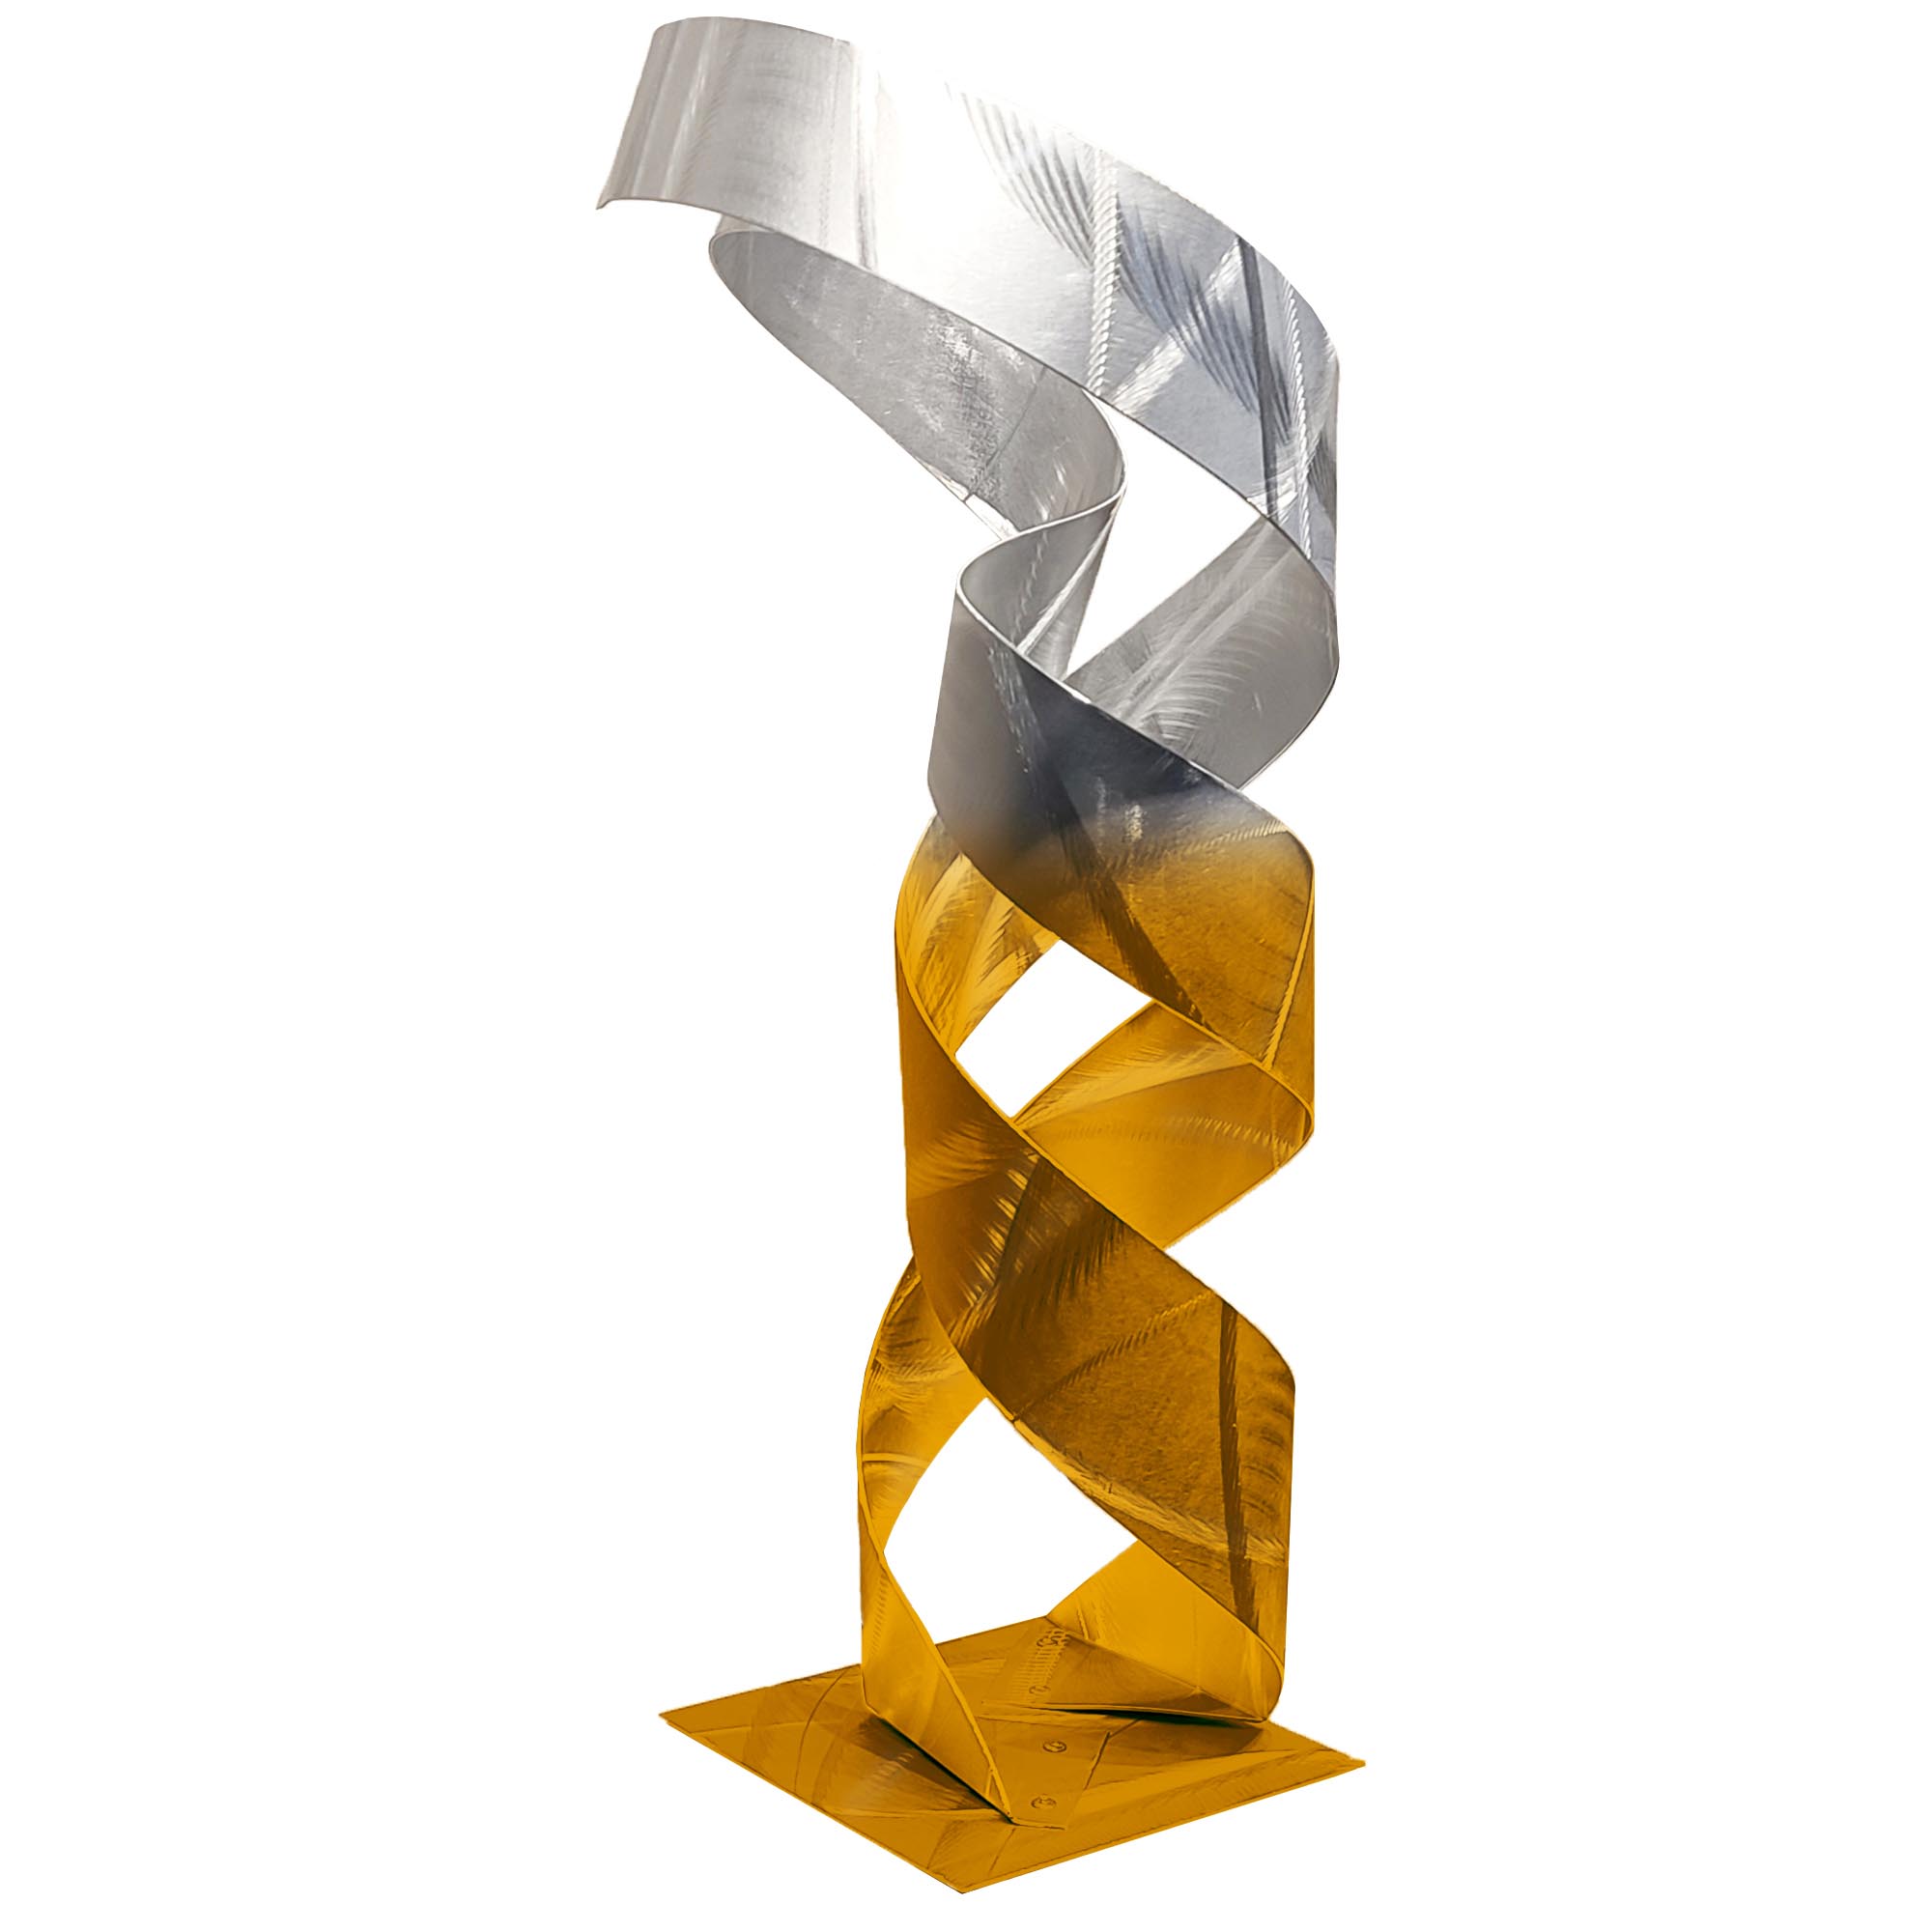 Continuum Gold Fade by Carlos Jacobs - Metal Sculpture, Modern Decor (10x25in.) - Image 2